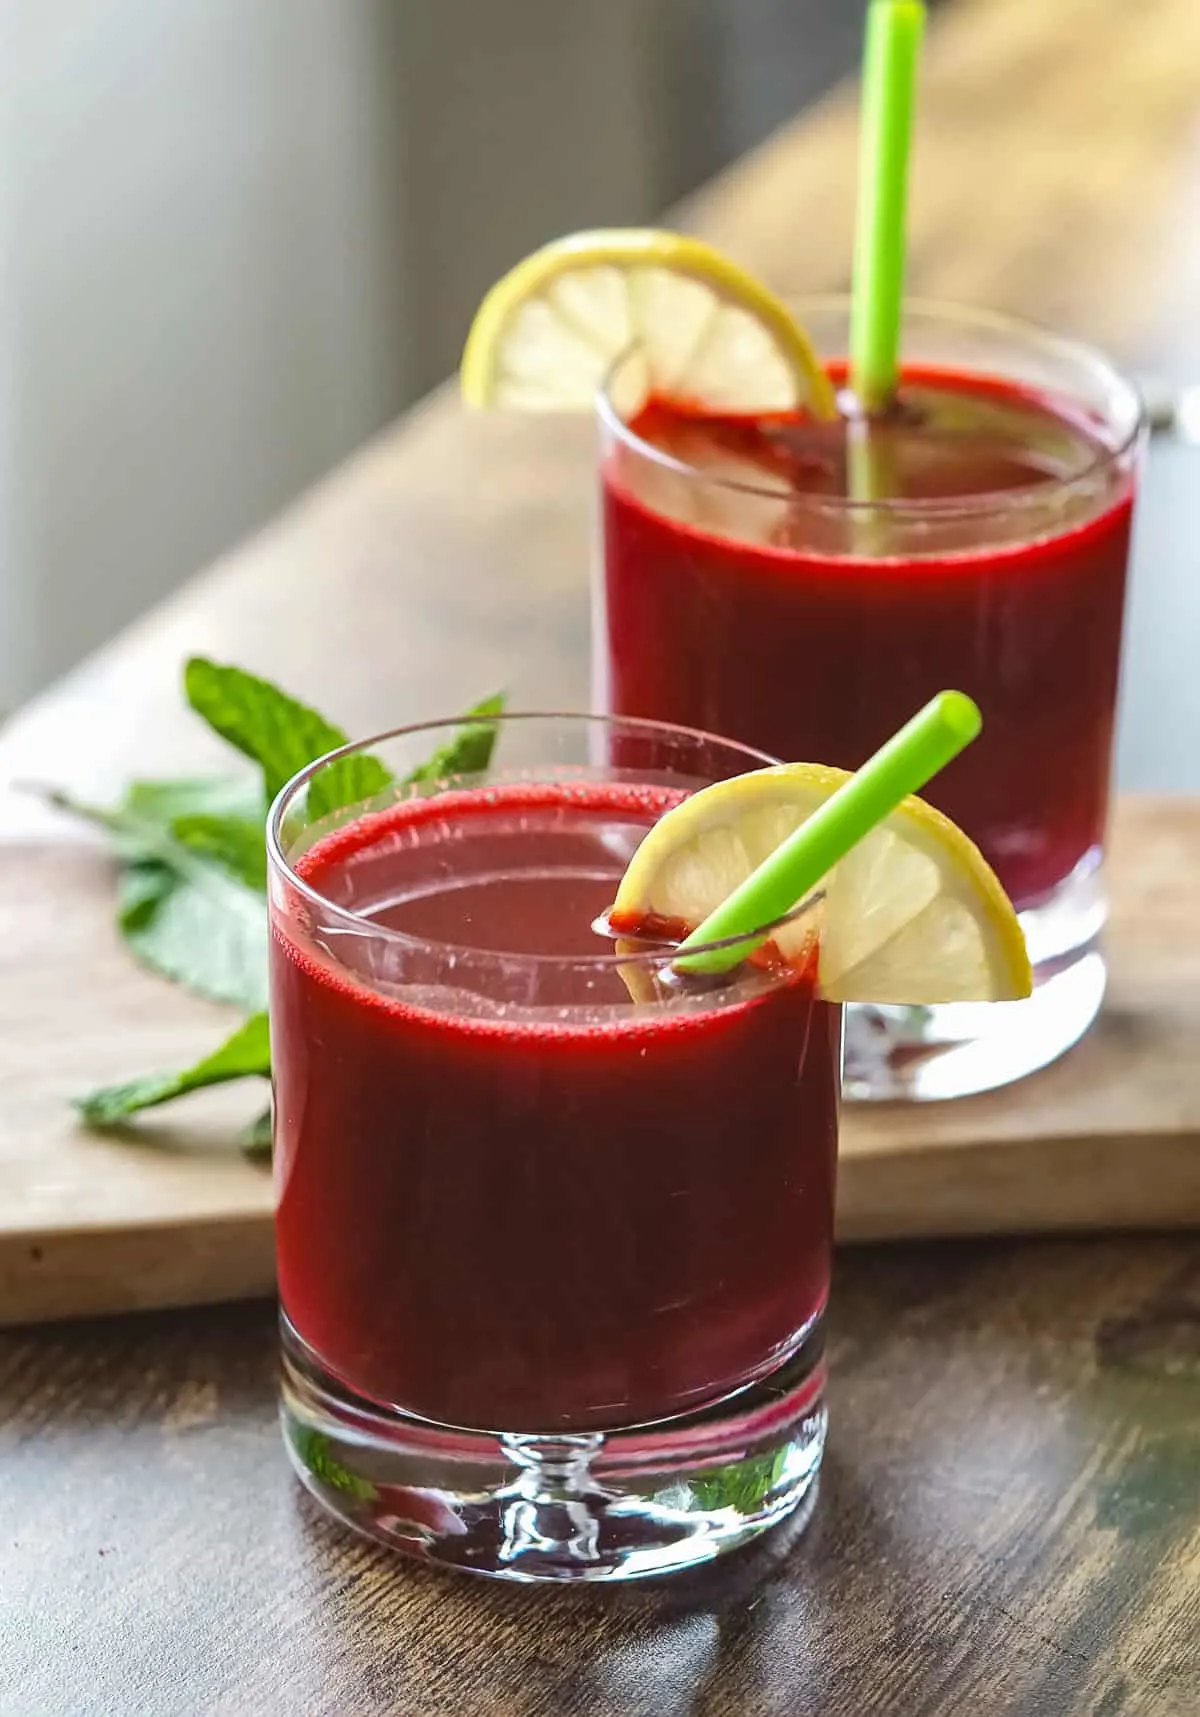 Beet juice blend in a glass, ready to be served.